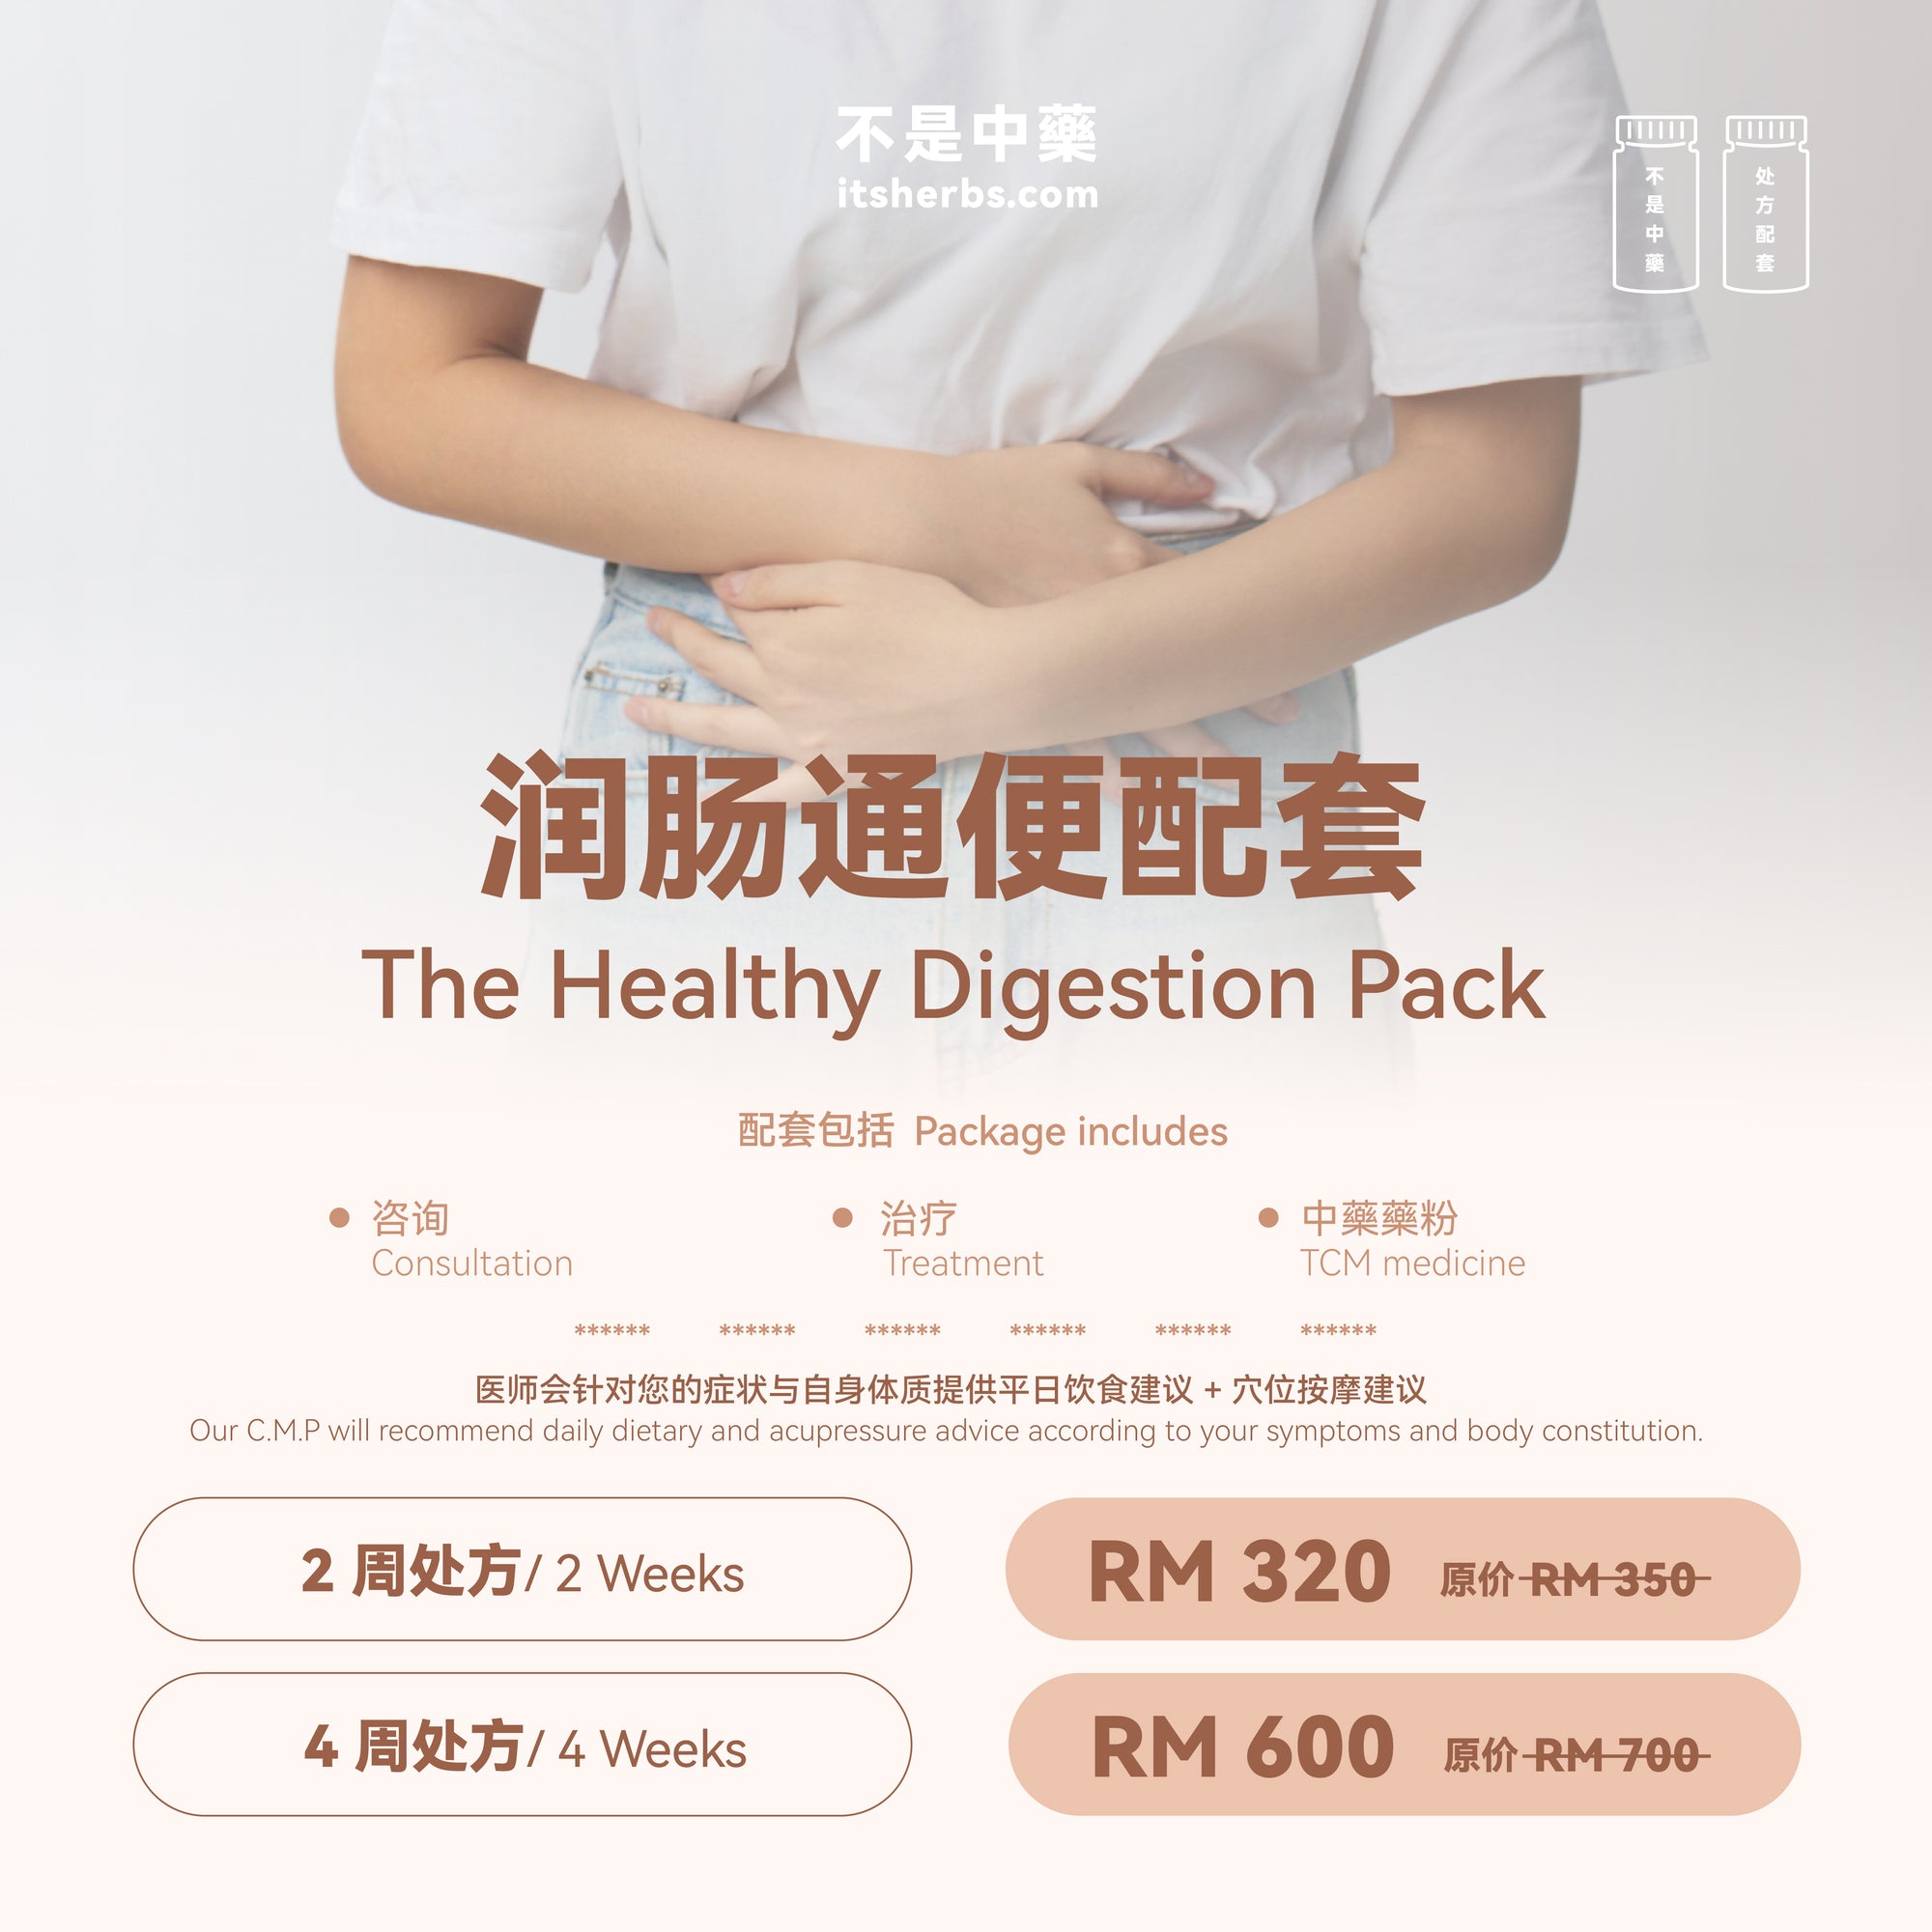 The Healthy Digestion Pack